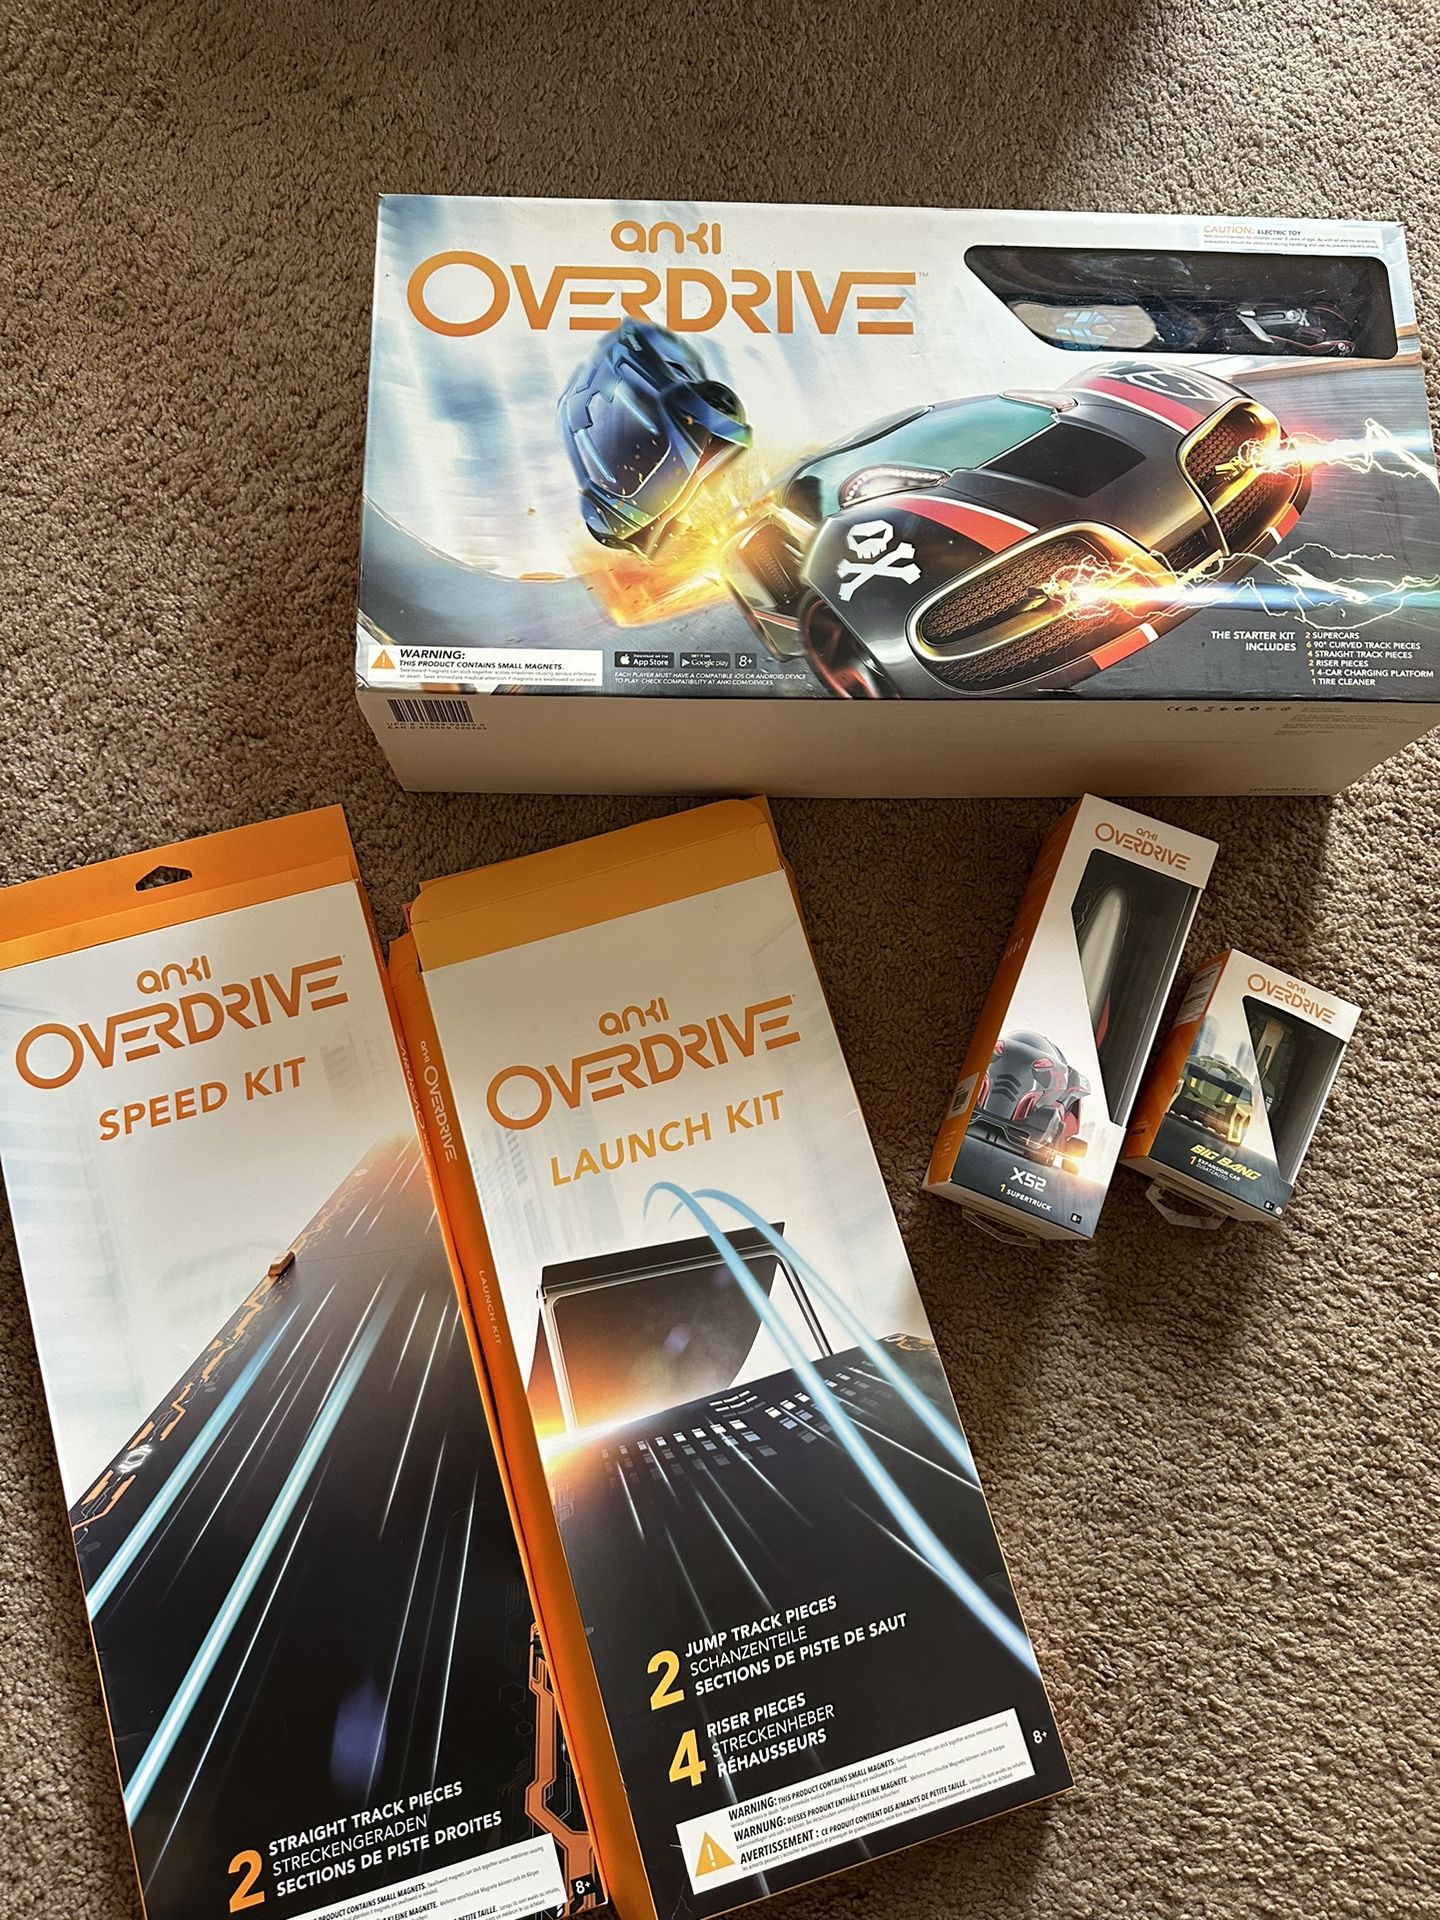 Anki Overdrive Starter Kit + There is a extra car  And Extra Pairs Of Tracks